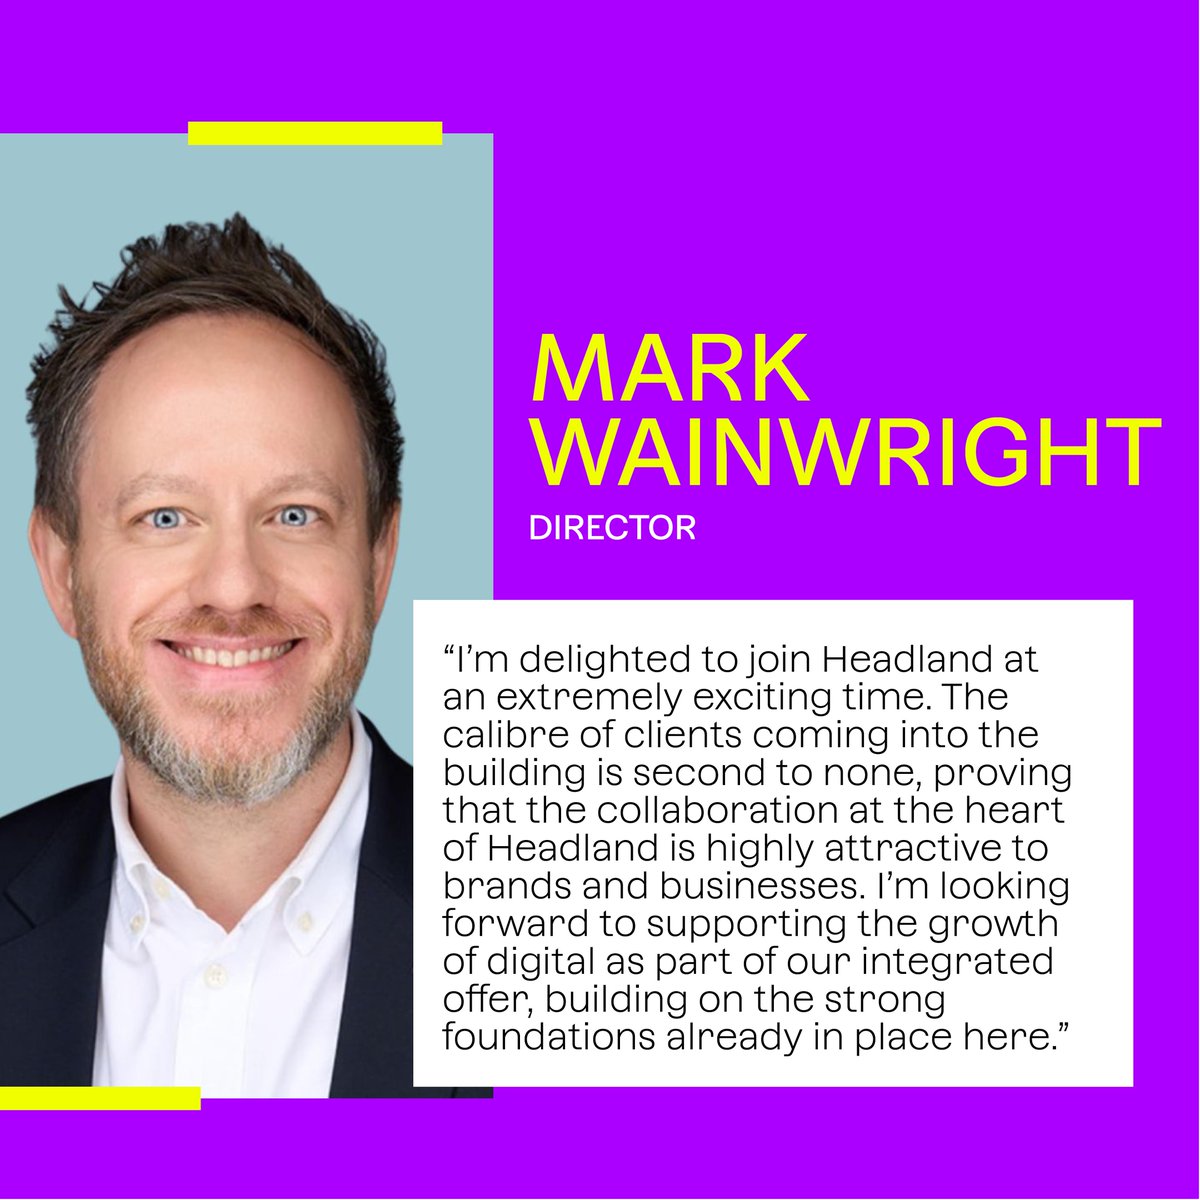 Welcome to our new Digital Director, Mark Wainwright!